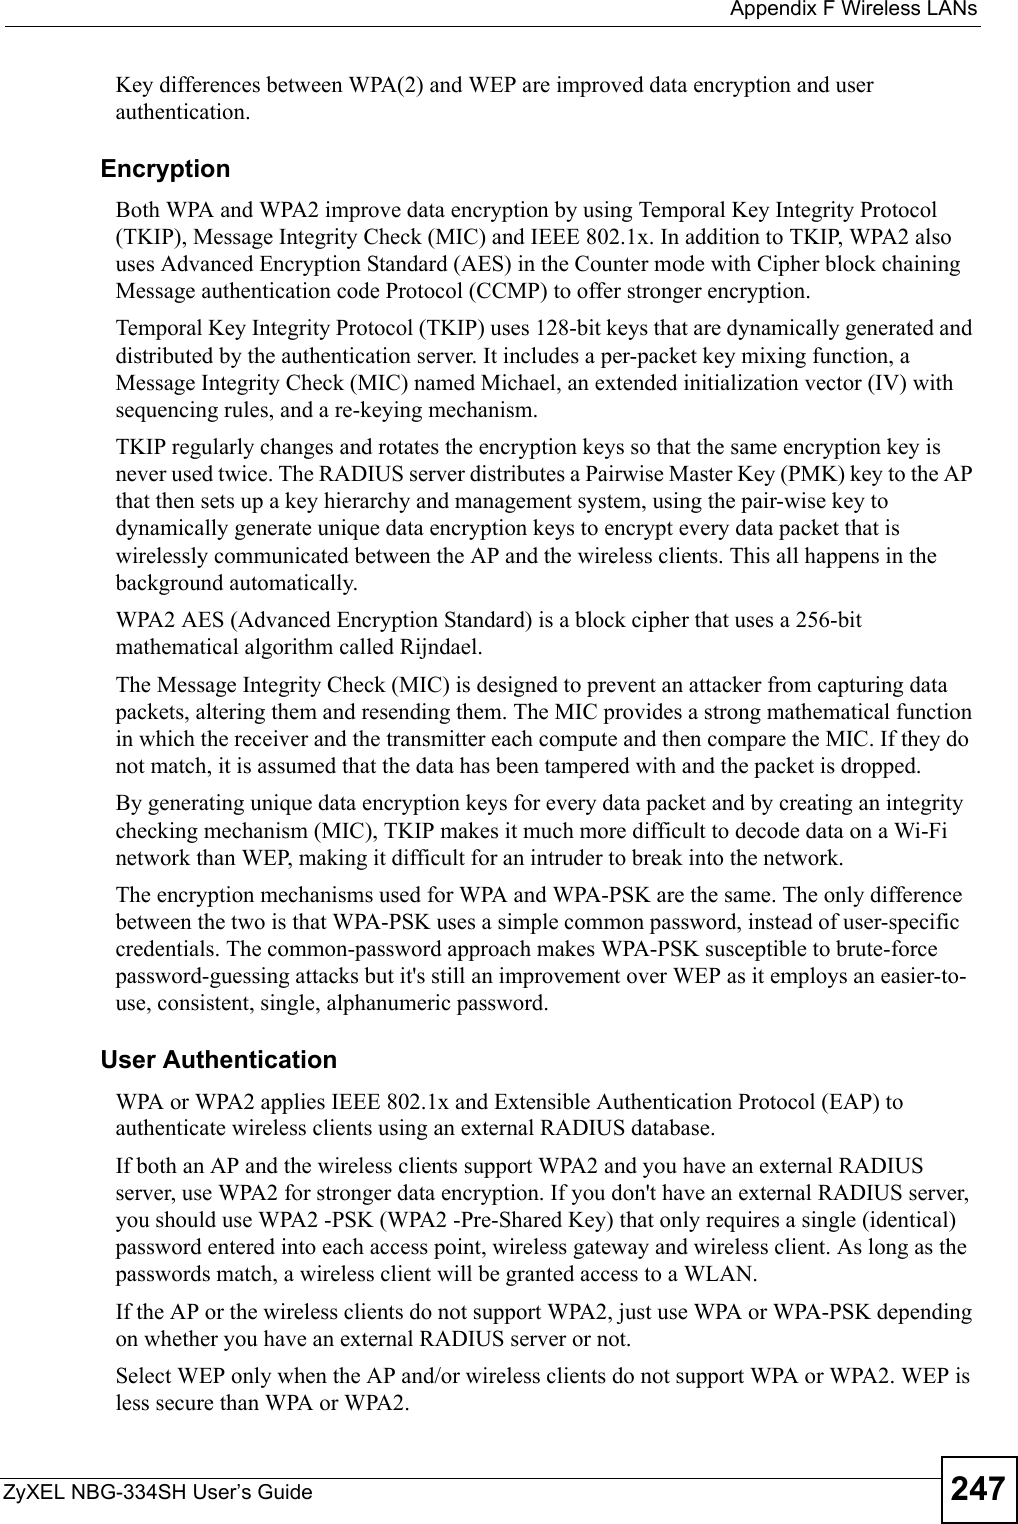  Appendix F Wireless LANsZyXEL NBG-334SH User’s Guide 247Key differences between WPA(2) and WEP are improved data encryption and user authentication.              EncryptionBoth WPA and WPA2 improve data encryption by using Temporal Key Integrity Protocol (TKIP), Message Integrity Check (MIC) and IEEE 802.1x. In addition to TKIP, WPA2 also uses Advanced Encryption Standard (AES) in the Counter mode with Cipher block chaining Message authentication code Protocol (CCMP) to offer stronger encryption. Temporal Key Integrity Protocol (TKIP) uses 128-bit keys that are dynamically generated and distributed by the authentication server. It includes a per-packet key mixing function, a Message Integrity Check (MIC) named Michael, an extended initialization vector (IV) with sequencing rules, and a re-keying mechanism.TKIP regularly changes and rotates the encryption keys so that the same encryption key is never used twice. The RADIUS server distributes a Pairwise Master Key (PMK) key to the AP that then sets up a key hierarchy and management system, using the pair-wise key to dynamically generate unique data encryption keys to encrypt every data packet that is wirelessly communicated between the AP and the wireless clients. This all happens in the background automatically.WPA2 AES (Advanced Encryption Standard) is a block cipher that uses a 256-bit mathematical algorithm called Rijndael.The Message Integrity Check (MIC) is designed to prevent an attacker from capturing data packets, altering them and resending them. The MIC provides a strong mathematical function in which the receiver and the transmitter each compute and then compare the MIC. If they do not match, it is assumed that the data has been tampered with and the packet is dropped. By generating unique data encryption keys for every data packet and by creating an integrity checking mechanism (MIC), TKIP makes it much more difficult to decode data on a Wi-Fi network than WEP, making it difficult for an intruder to break into the network. The encryption mechanisms used for WPA and WPA-PSK are the same. The only difference between the two is that WPA-PSK uses a simple common password, instead of user-specific credentials. The common-password approach makes WPA-PSK susceptible to brute-force password-guessing attacks but it&apos;s still an improvement over WEP as it employs an easier-to-use, consistent, single, alphanumeric password.              User AuthenticationWPA or WPA2 applies IEEE 802.1x and Extensible Authentication Protocol (EAP) to authenticate wireless clients using an external RADIUS database. If both an AP and the wireless clients support WPA2 and you have an external RADIUS server, use WPA2 for stronger data encryption. If you don&apos;t have an external RADIUS server, you should use WPA2 -PSK (WPA2 -Pre-Shared Key) that only requires a single (identical) password entered into each access point, wireless gateway and wireless client. As long as the passwords match, a wireless client will be granted access to a WLAN. If the AP or the wireless clients do not support WPA2, just use WPA or WPA-PSK depending on whether you have an external RADIUS server or not.Select WEP only when the AP and/or wireless clients do not support WPA or WPA2. WEP is less secure than WPA or WPA2.